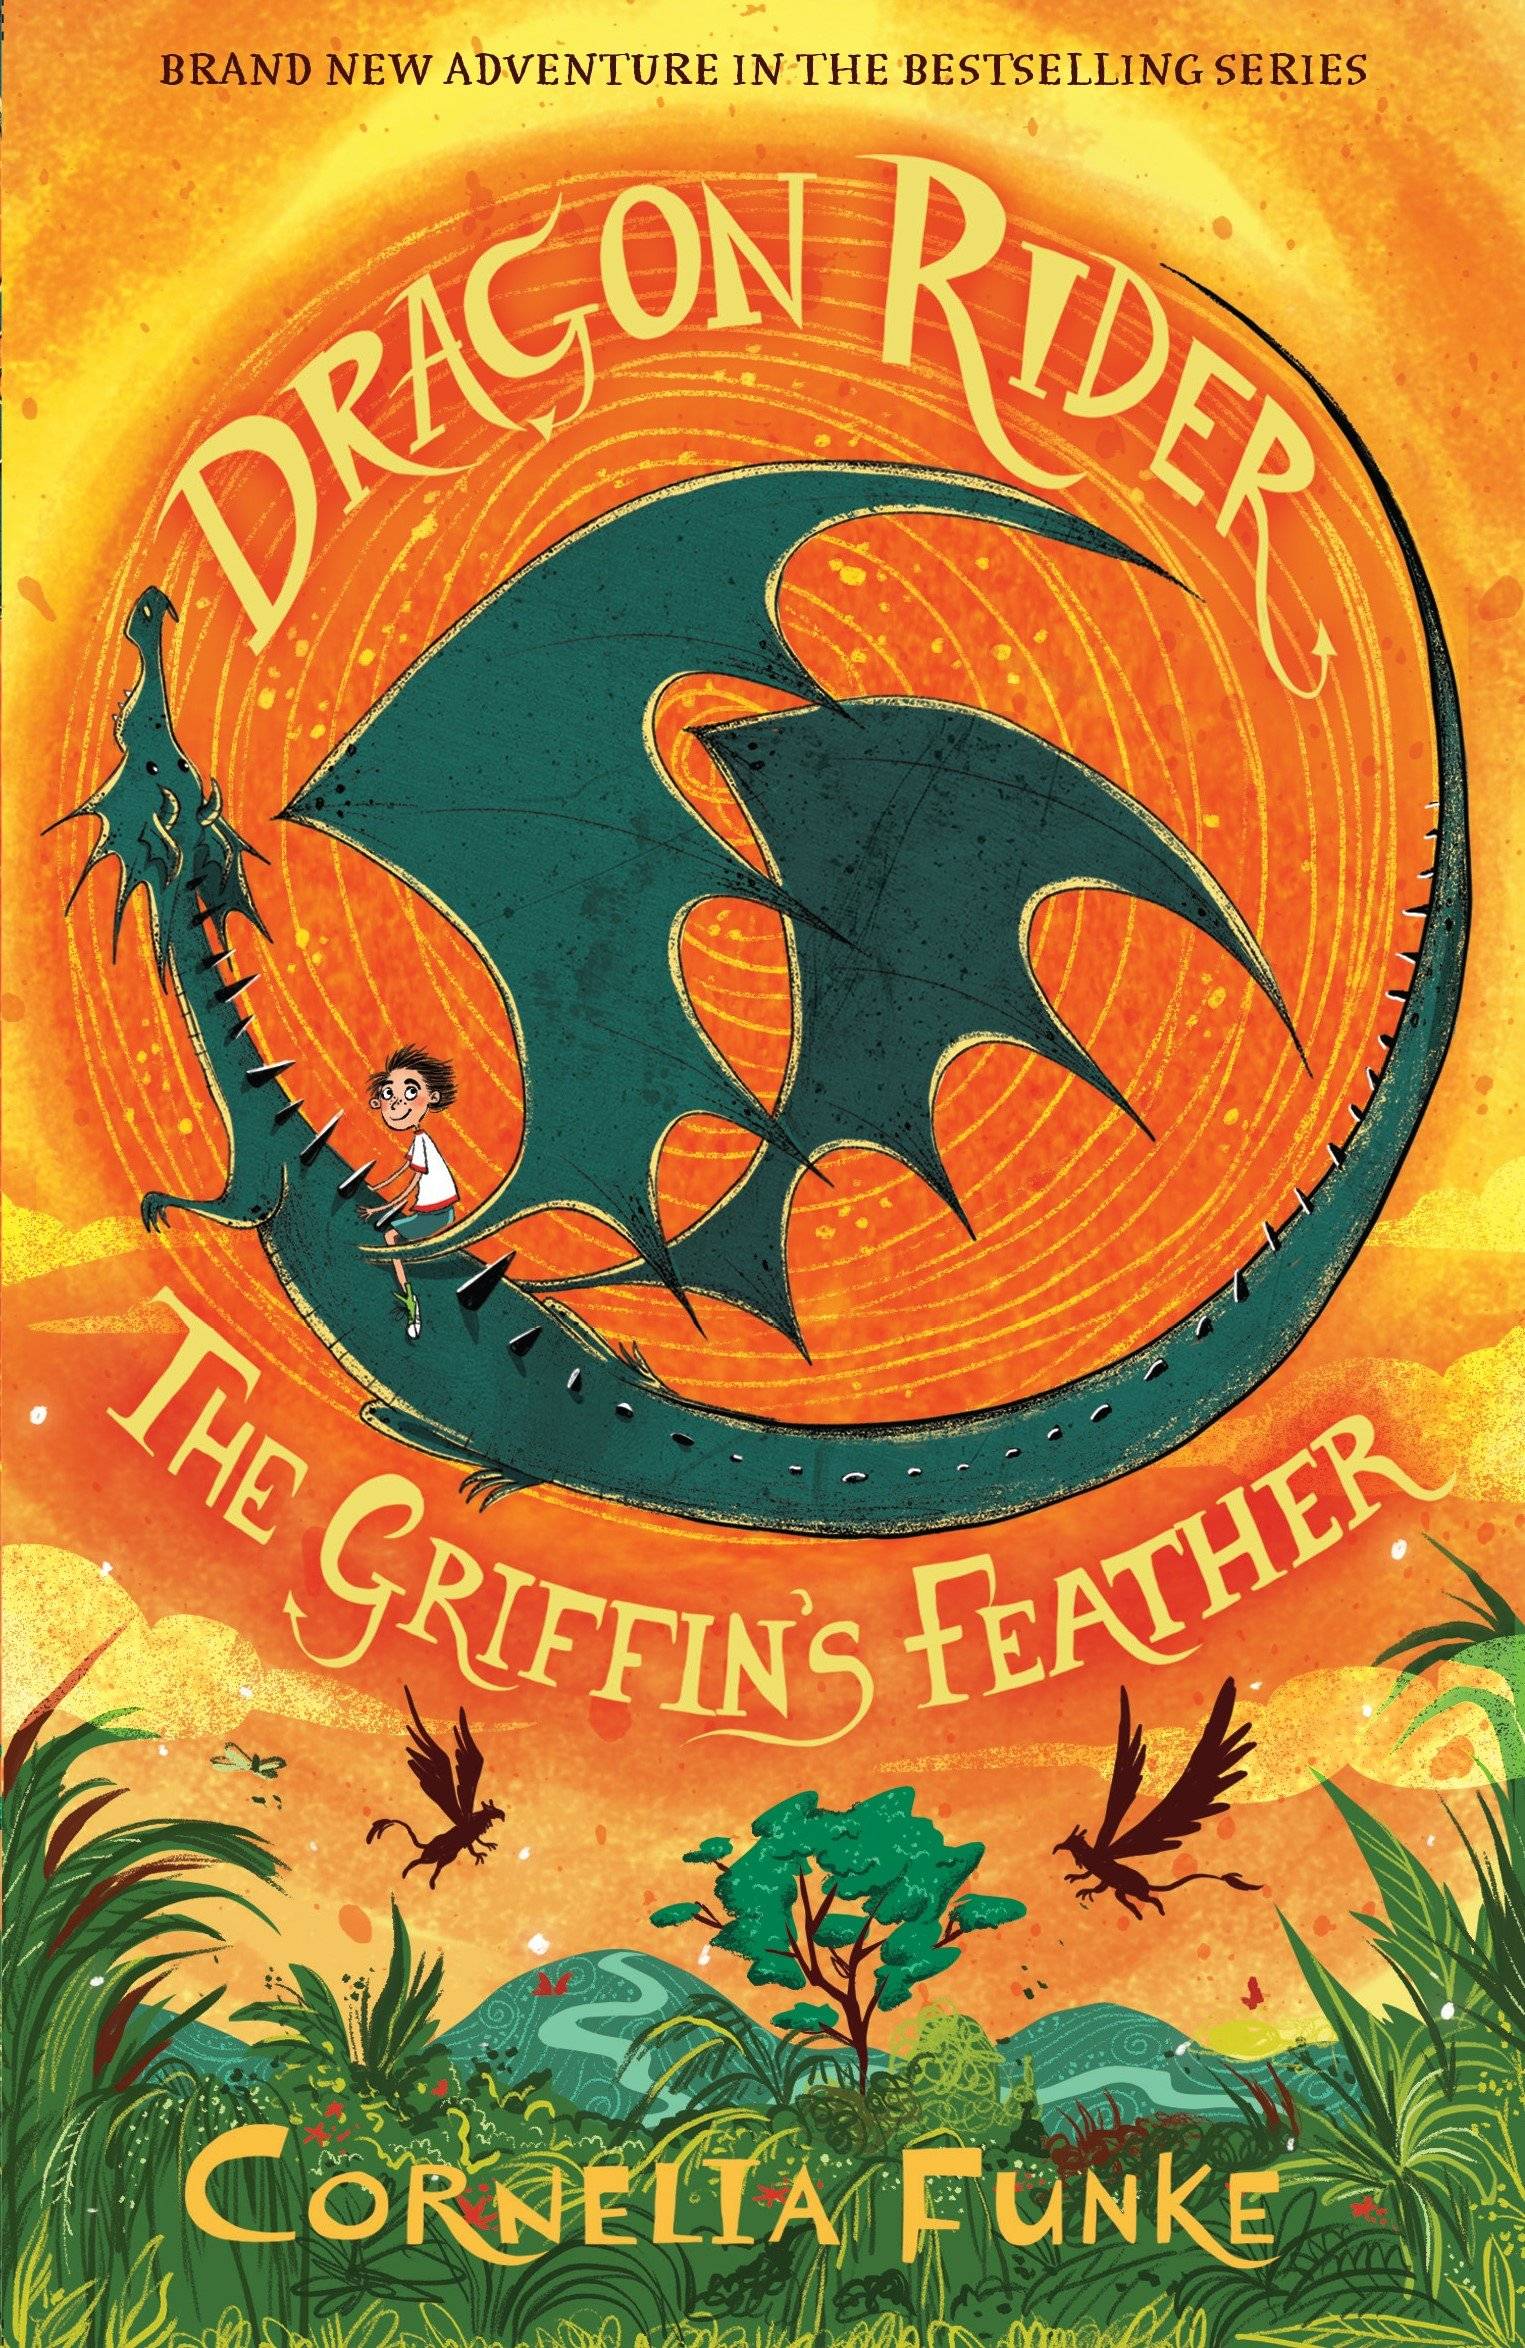 IMG : Dragon Rider  The Griffin's Feather #2